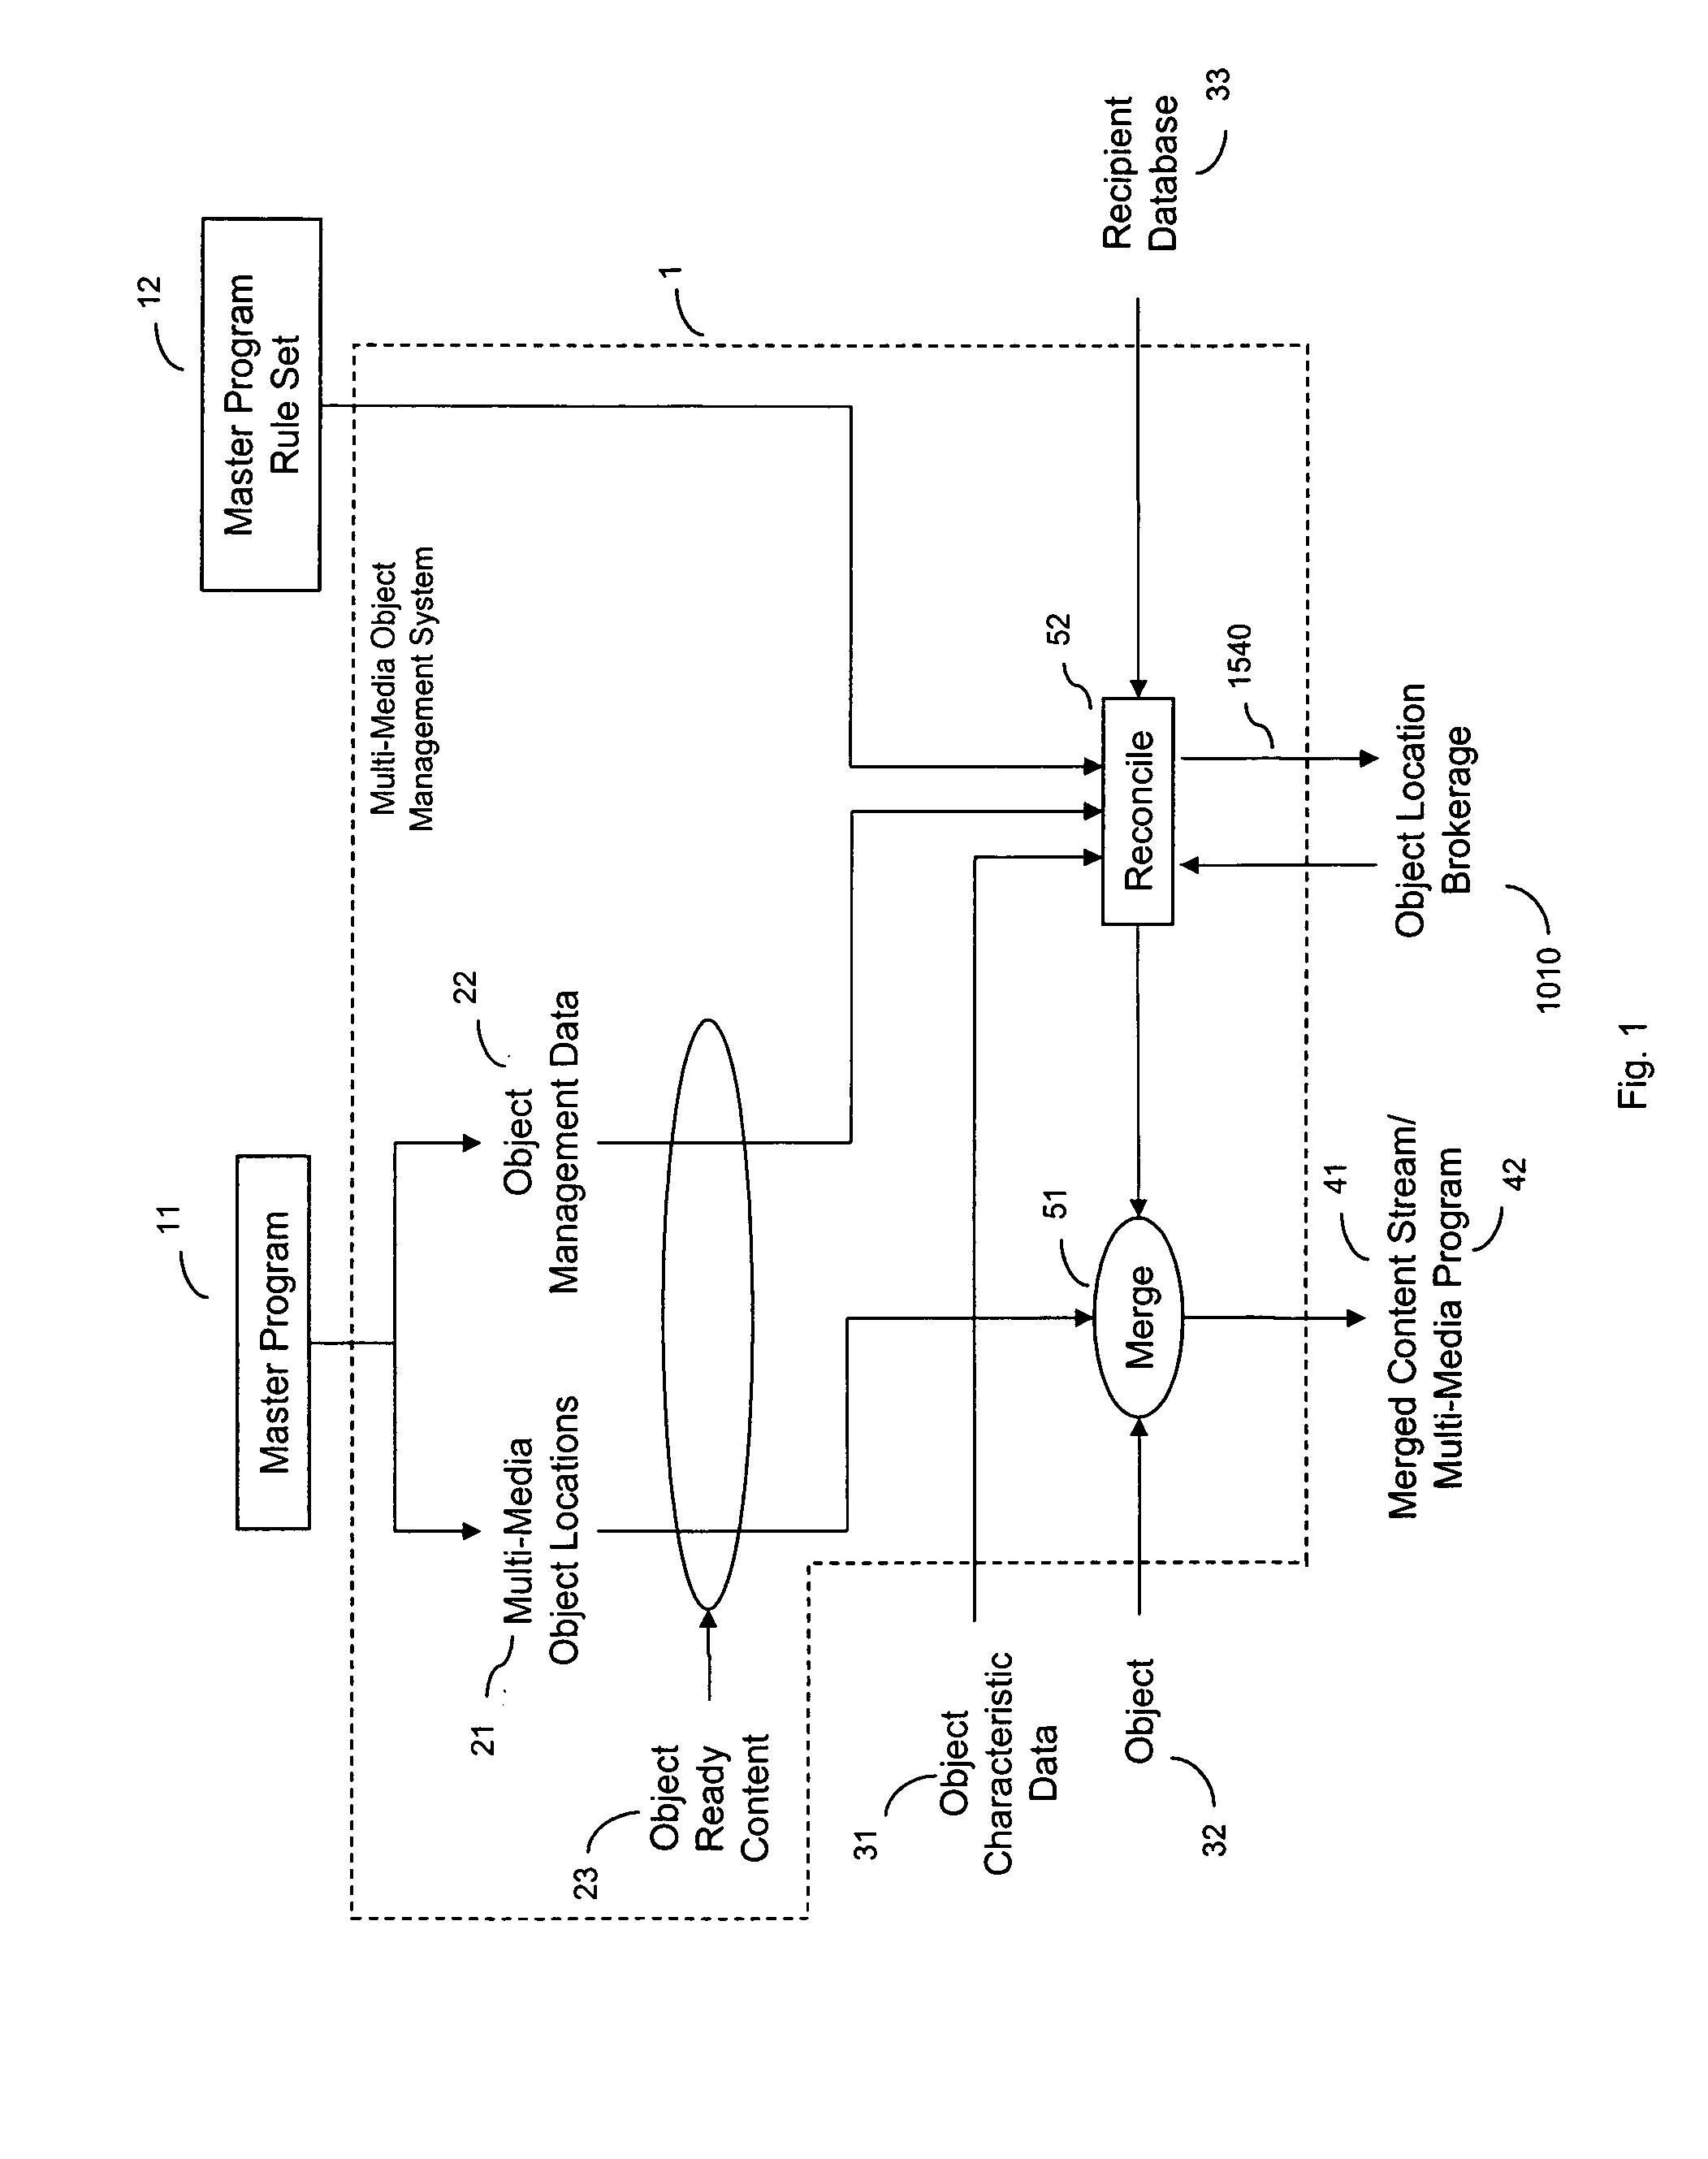 System for highlighting a dynamic personalized object placed in a multi-media program